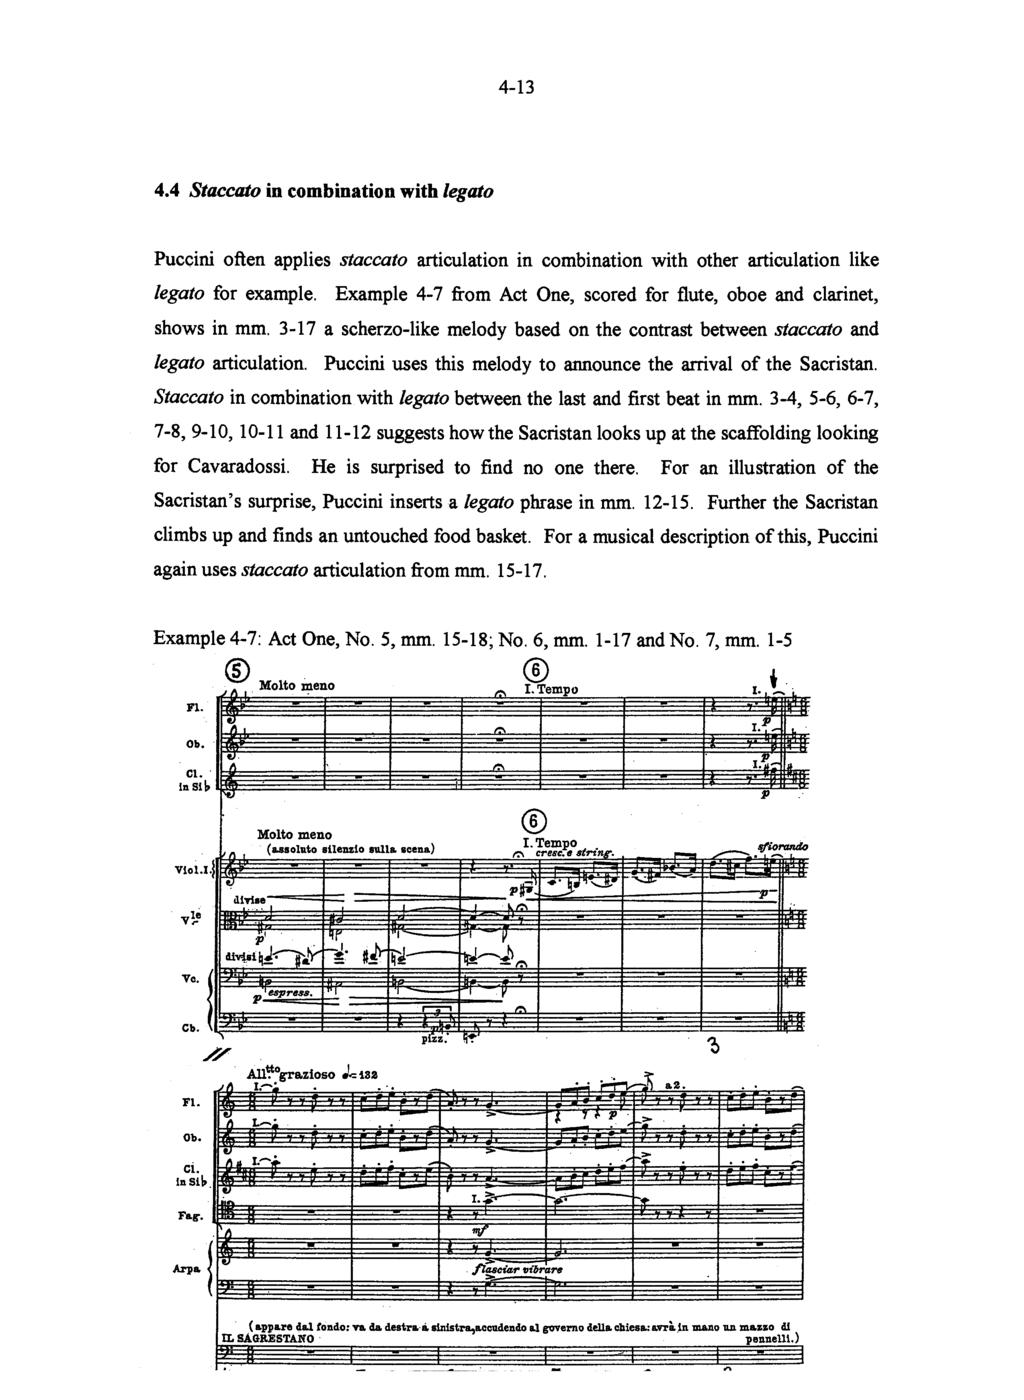 Puccini often applies staccato articulation in combination with other articulation like legato for example. Example 47 from Act One, scored for flute, oboe and clarinet, shows in mm.